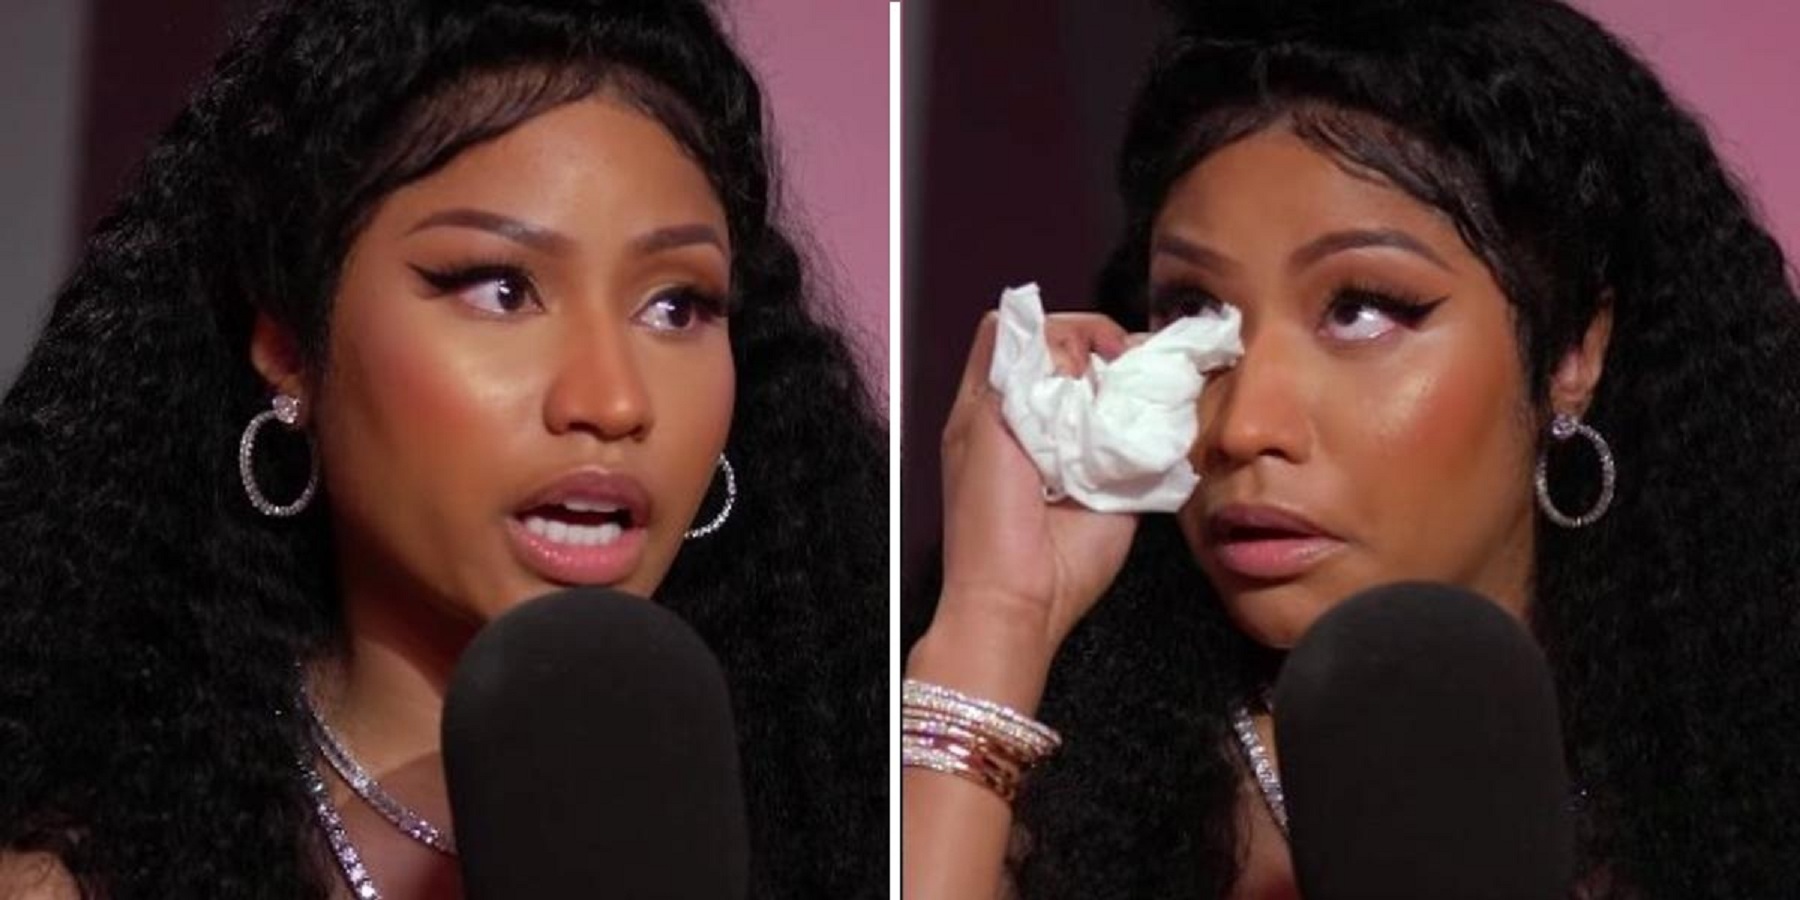 Nicki Minaj Blasts After Being Accused Of Not Supporting Other Female Rappers – “I’m The Fkng Goat”